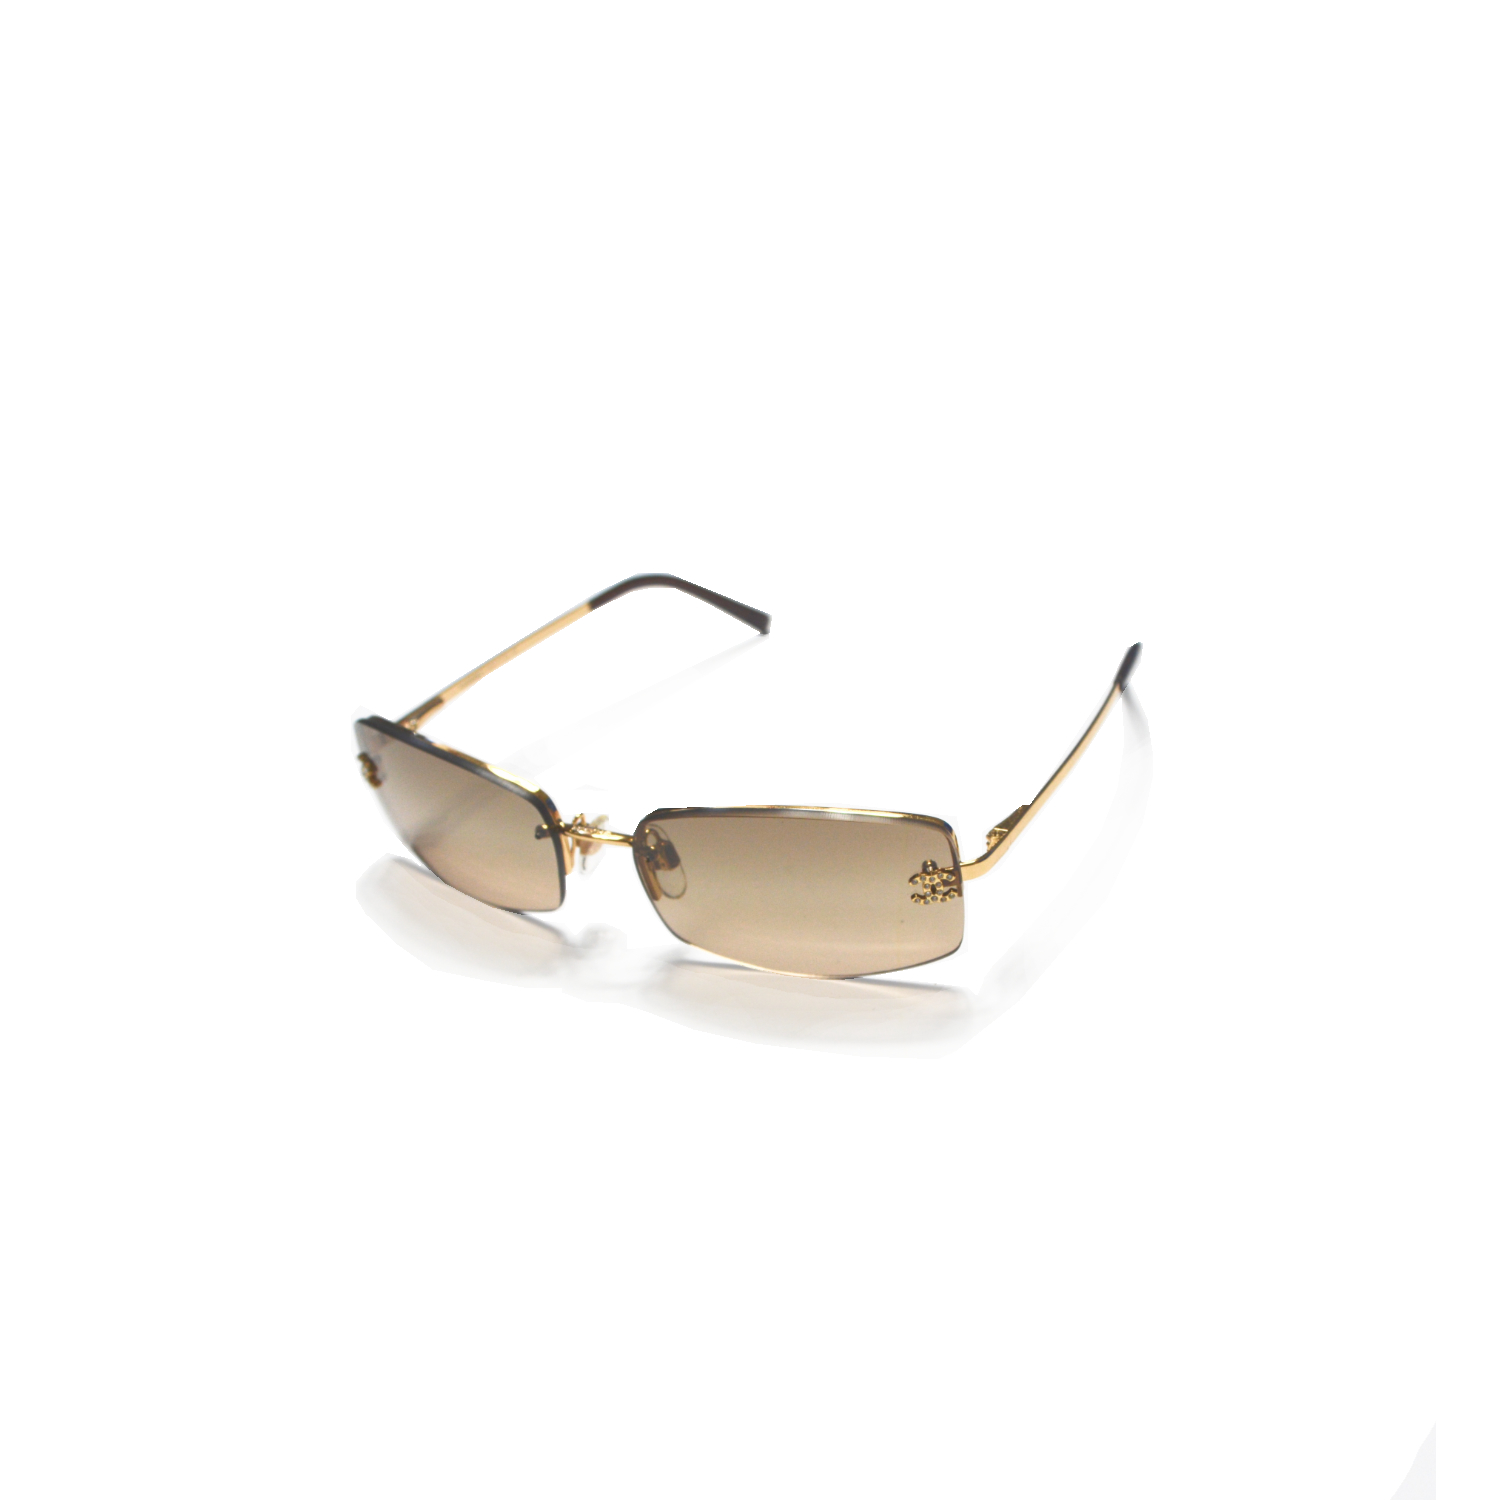 Vintage Chanel Rimless Tinted Sunglasses in Brown | NITRYL